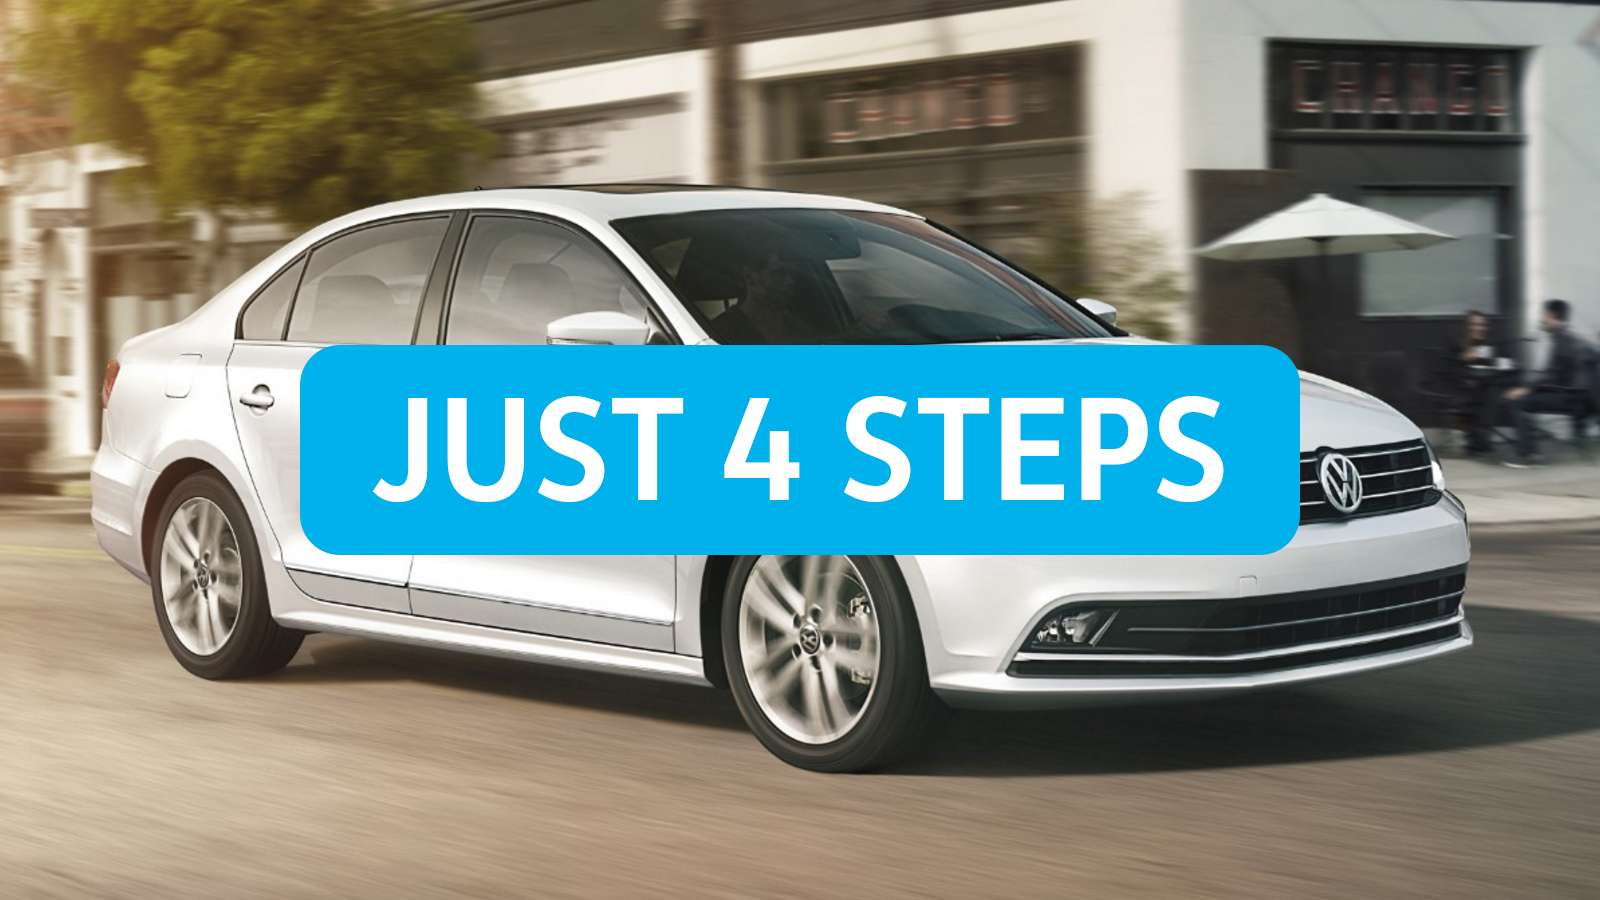 You're Just 4 Steps Away From a Buying New Volkswagen